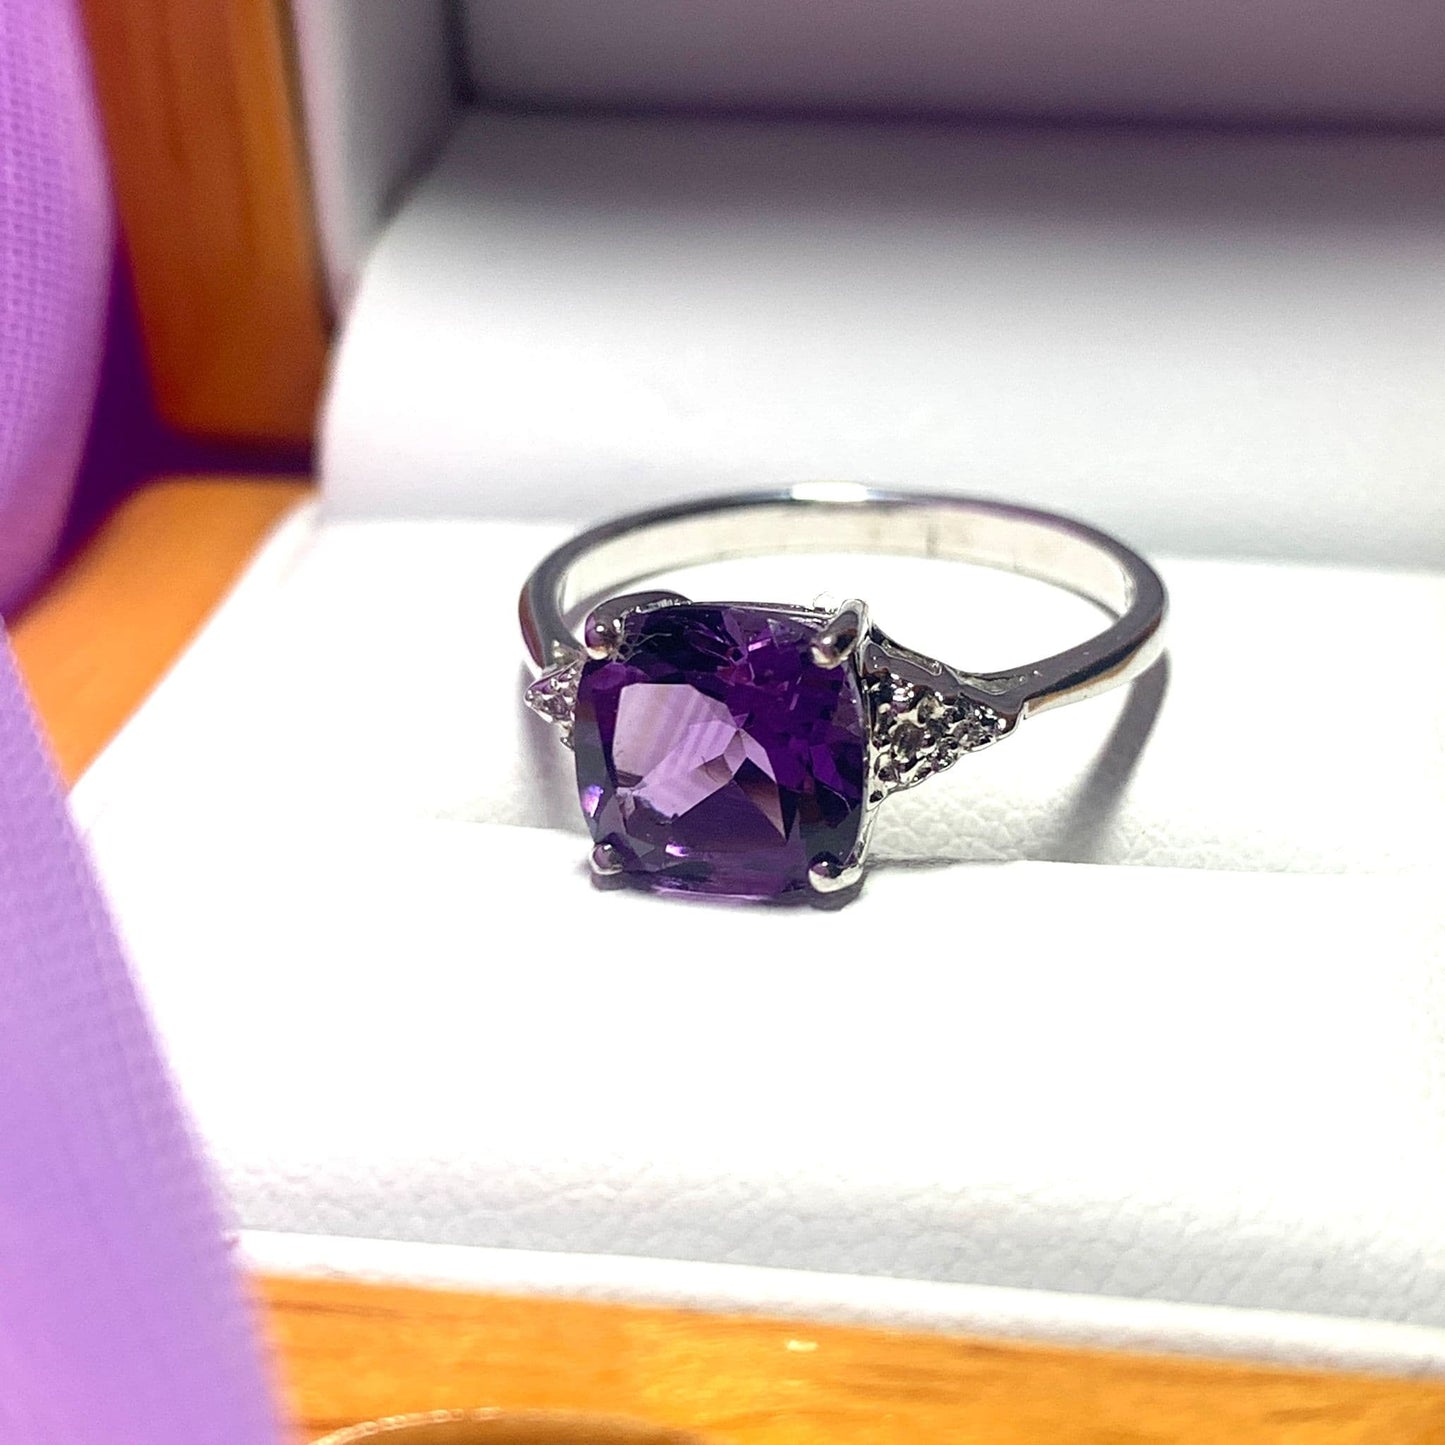 Cushion shaped amethyst and diamond sterling silver fancy dress cocktail ring